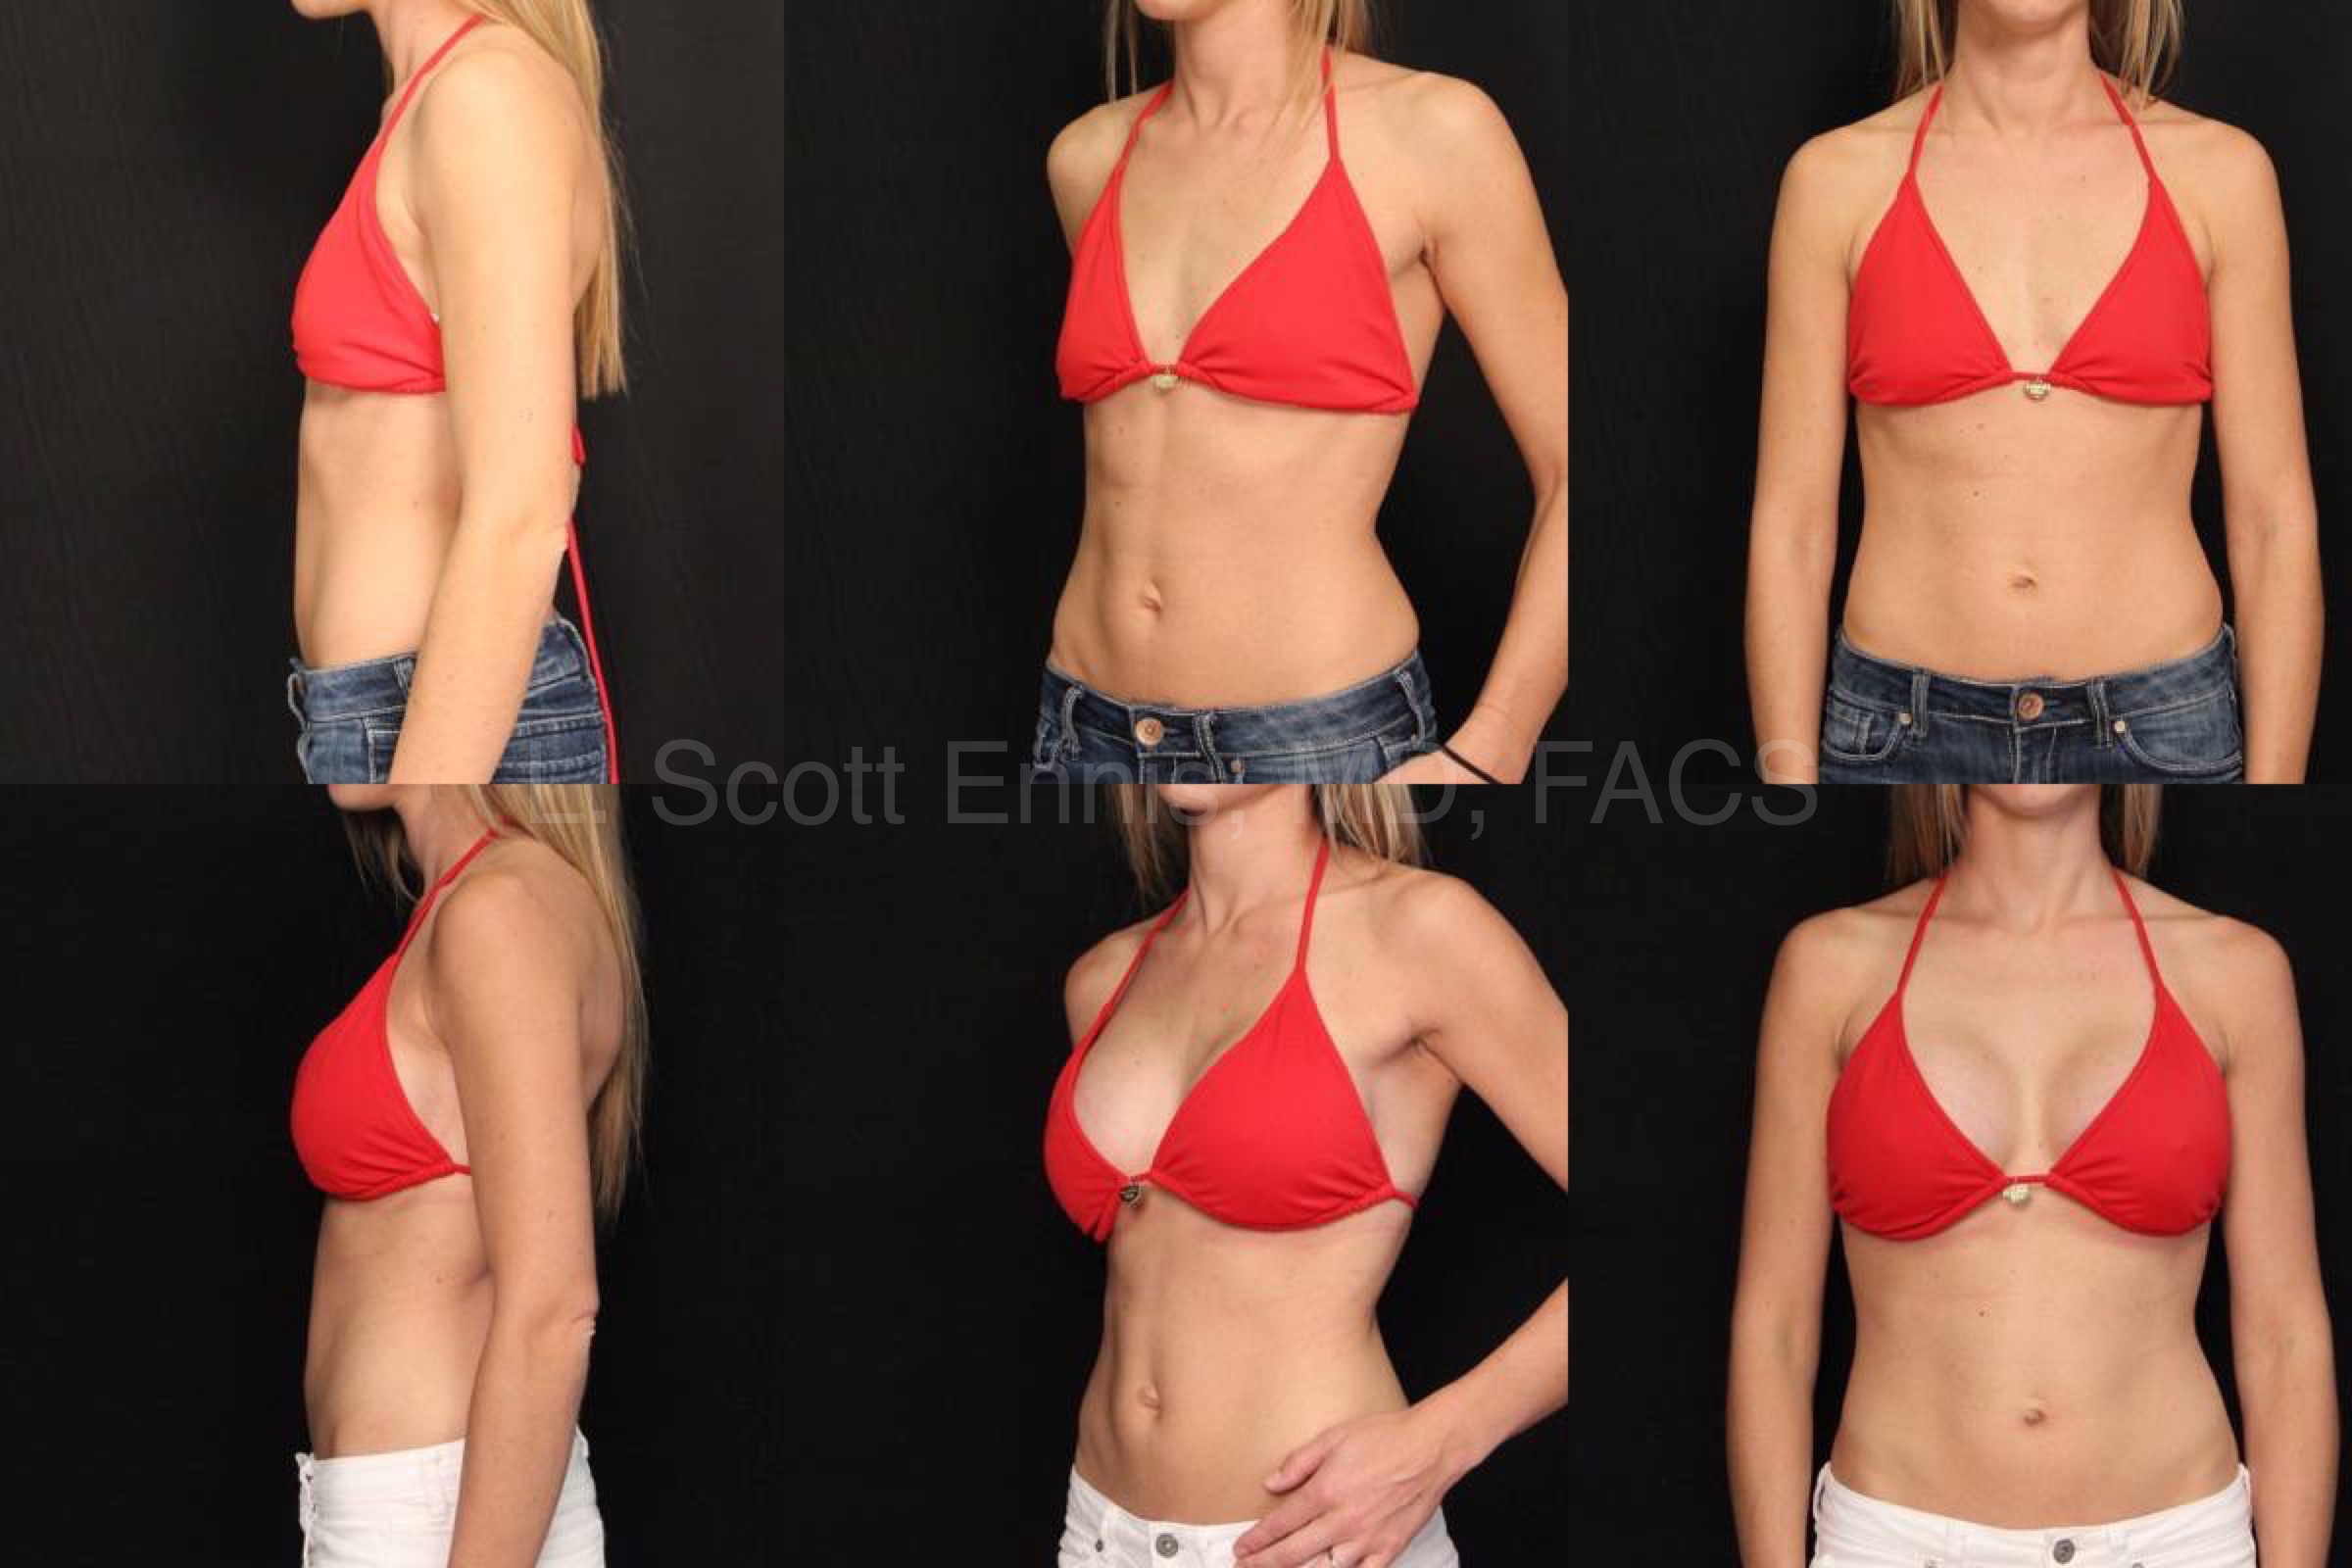 Do's and Don'ts of Breast Augmentation Recovery - Plastic Surgery